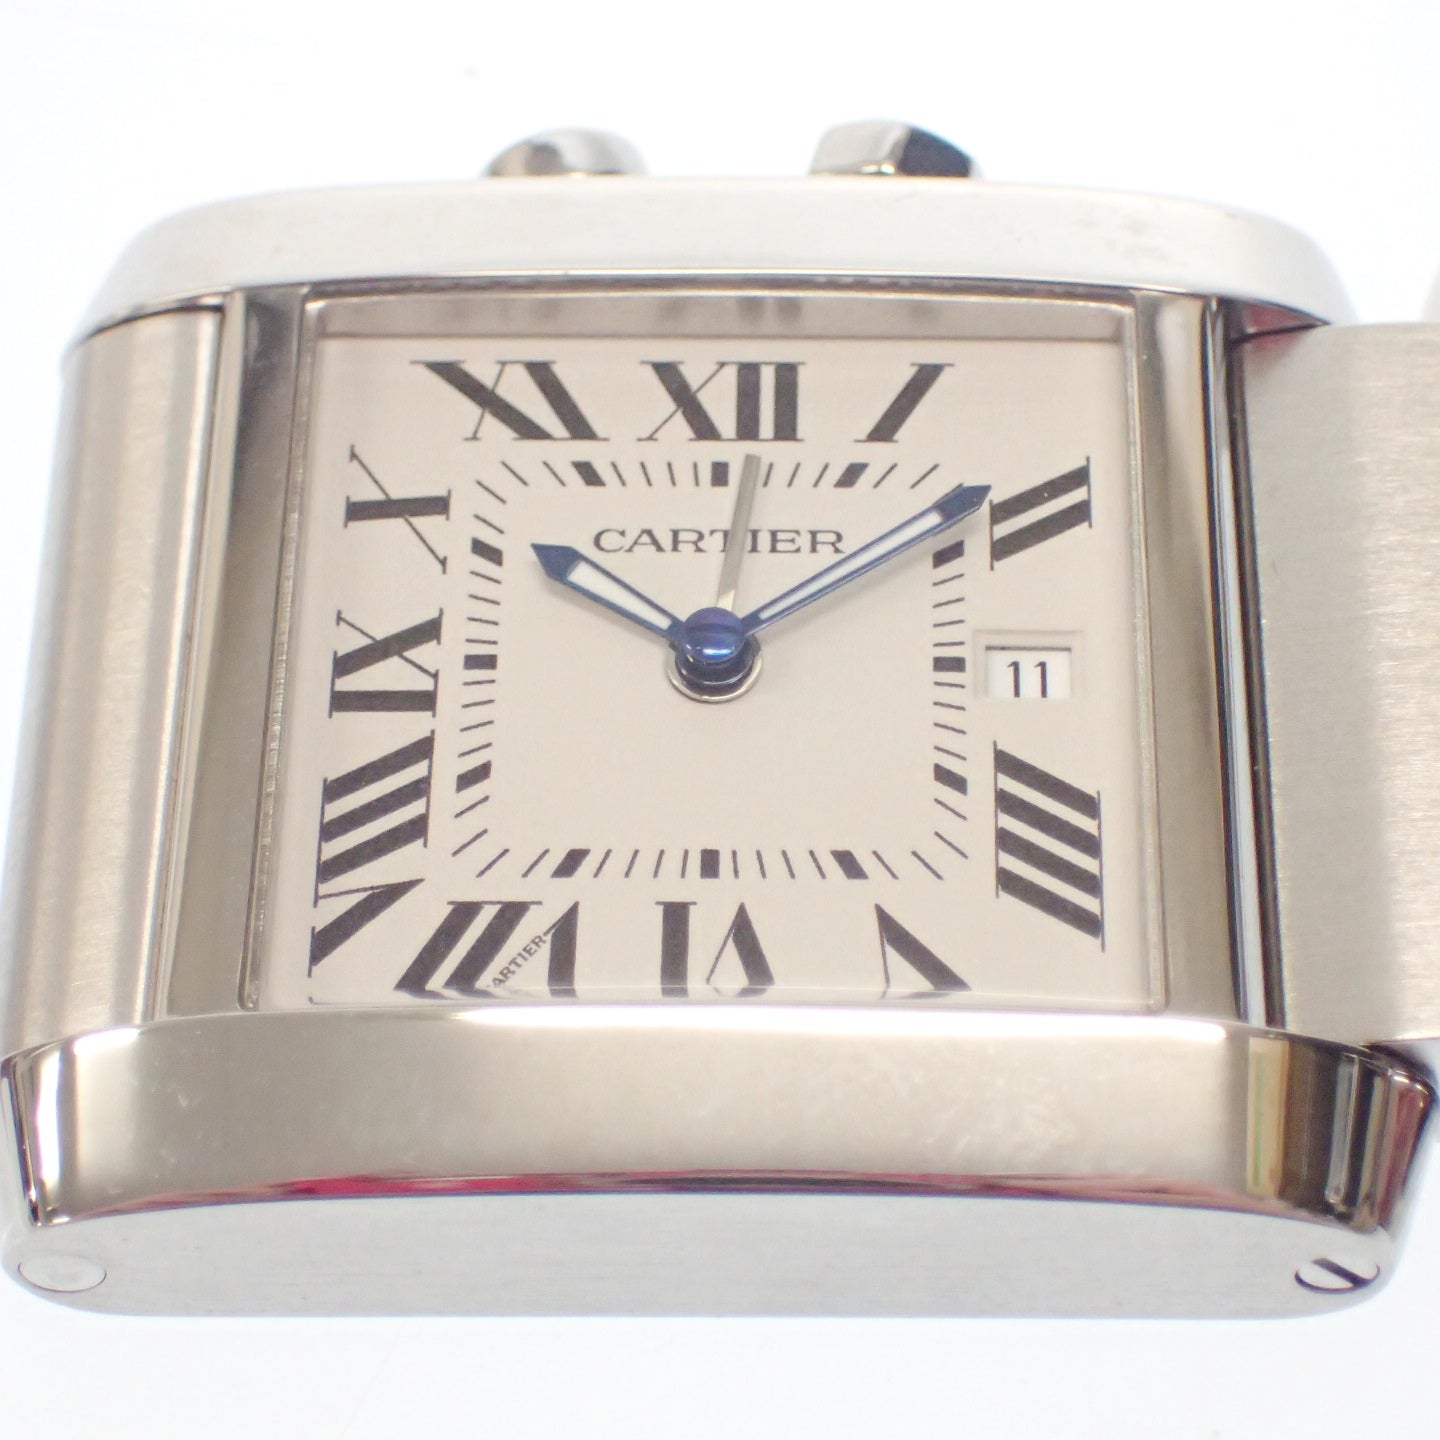 Cartier Travel Clock Tank Française Dial White x Black Silver with Box Cartier [AFI15] [Used] 